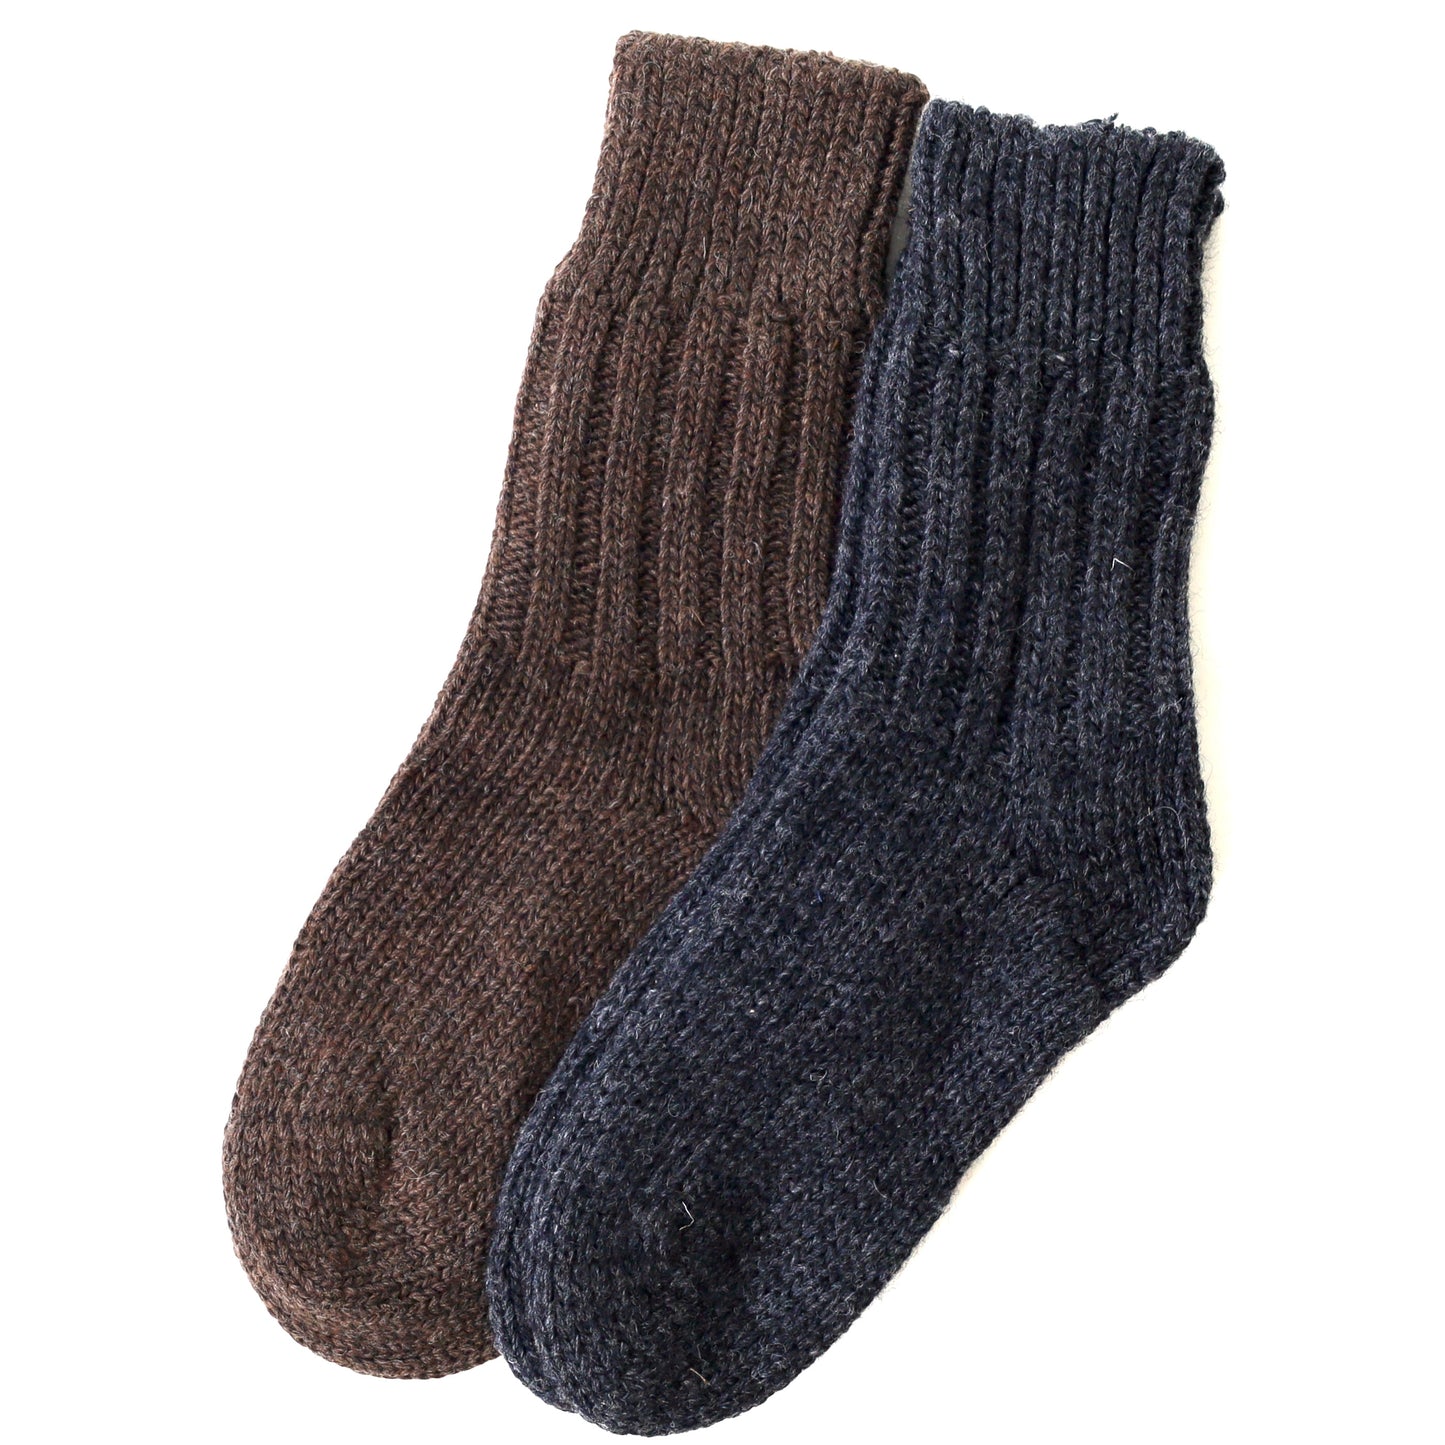 Hirsch Natur - 100% Organic Virgin Wool Socks with Grippers, Sizes 6-11.5  for Men and Women